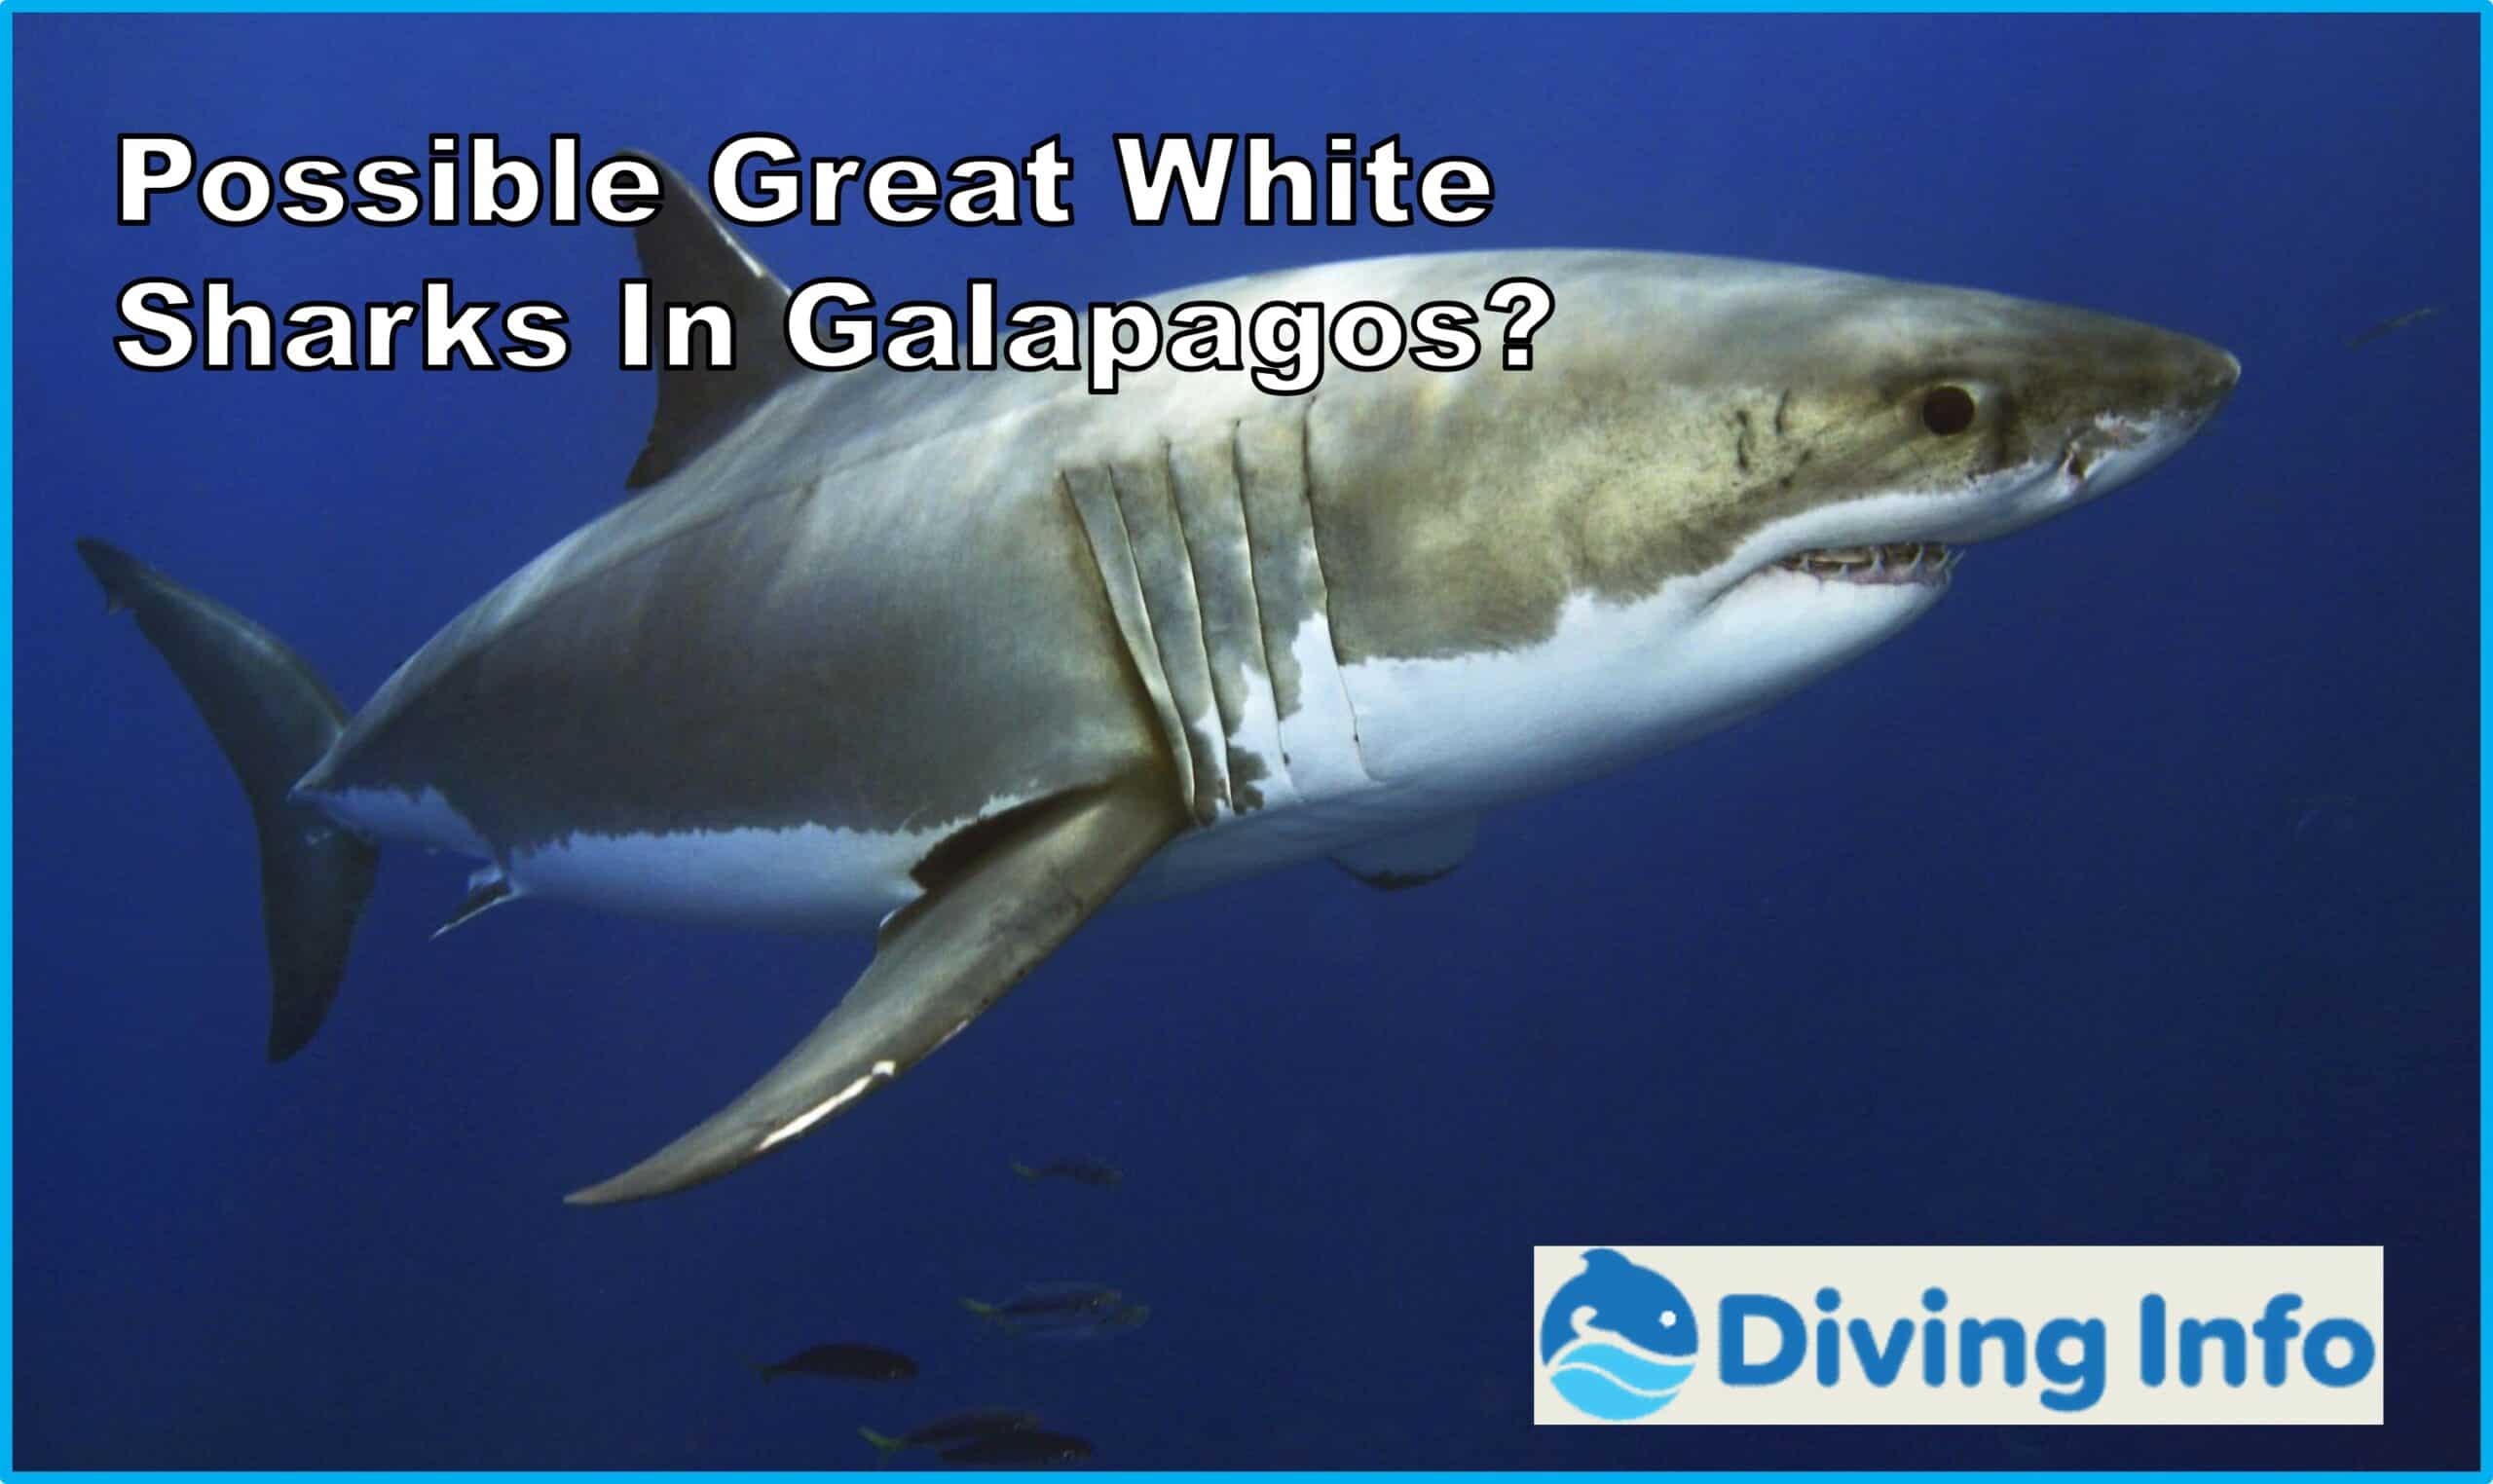 Possible Great White Sharks In Galapagos